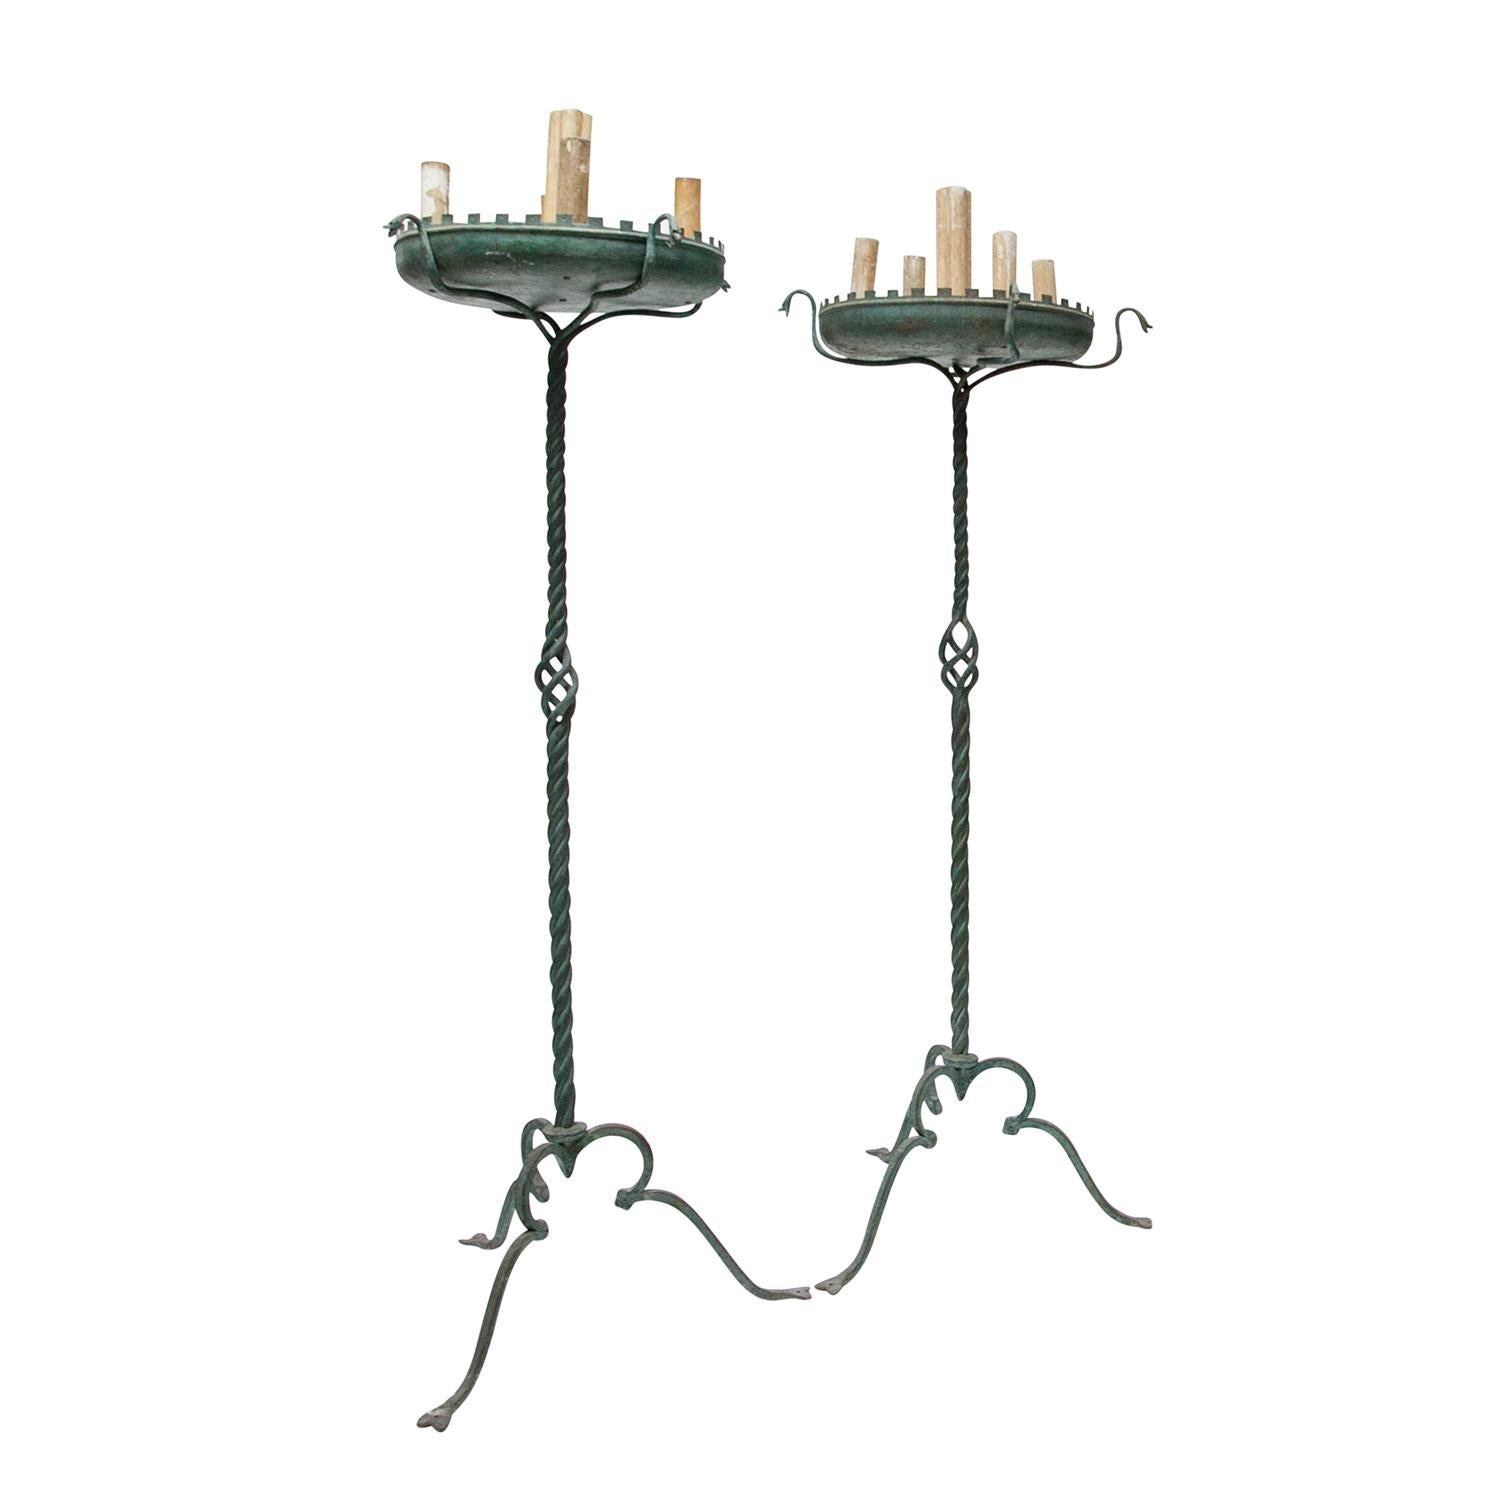 A green, vintage Art Deco Italian pair of large floor lamps made of handcrafted bronze with a twisted shaft and broad dish, in good condition. The detailed lighting is resting on stylized snakes, standing on three arched legs, each of them is